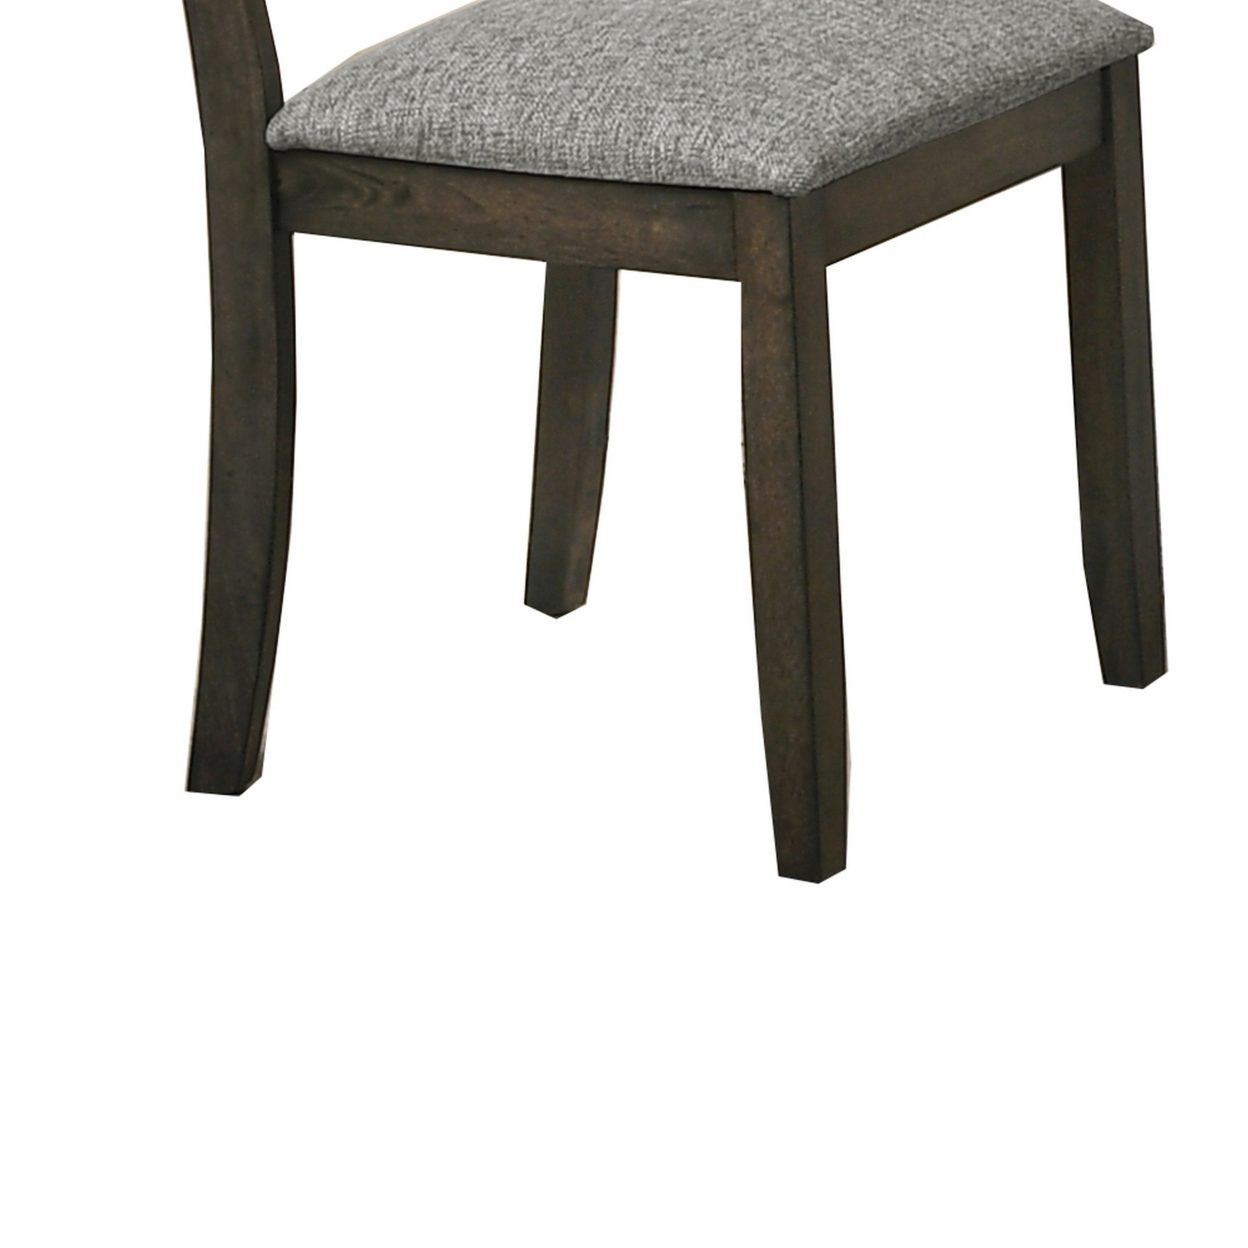 Wooden Side Chair With Fabric Upholstered Seat, Set Of 2, Brown And Gray- Saltoro Sherpi